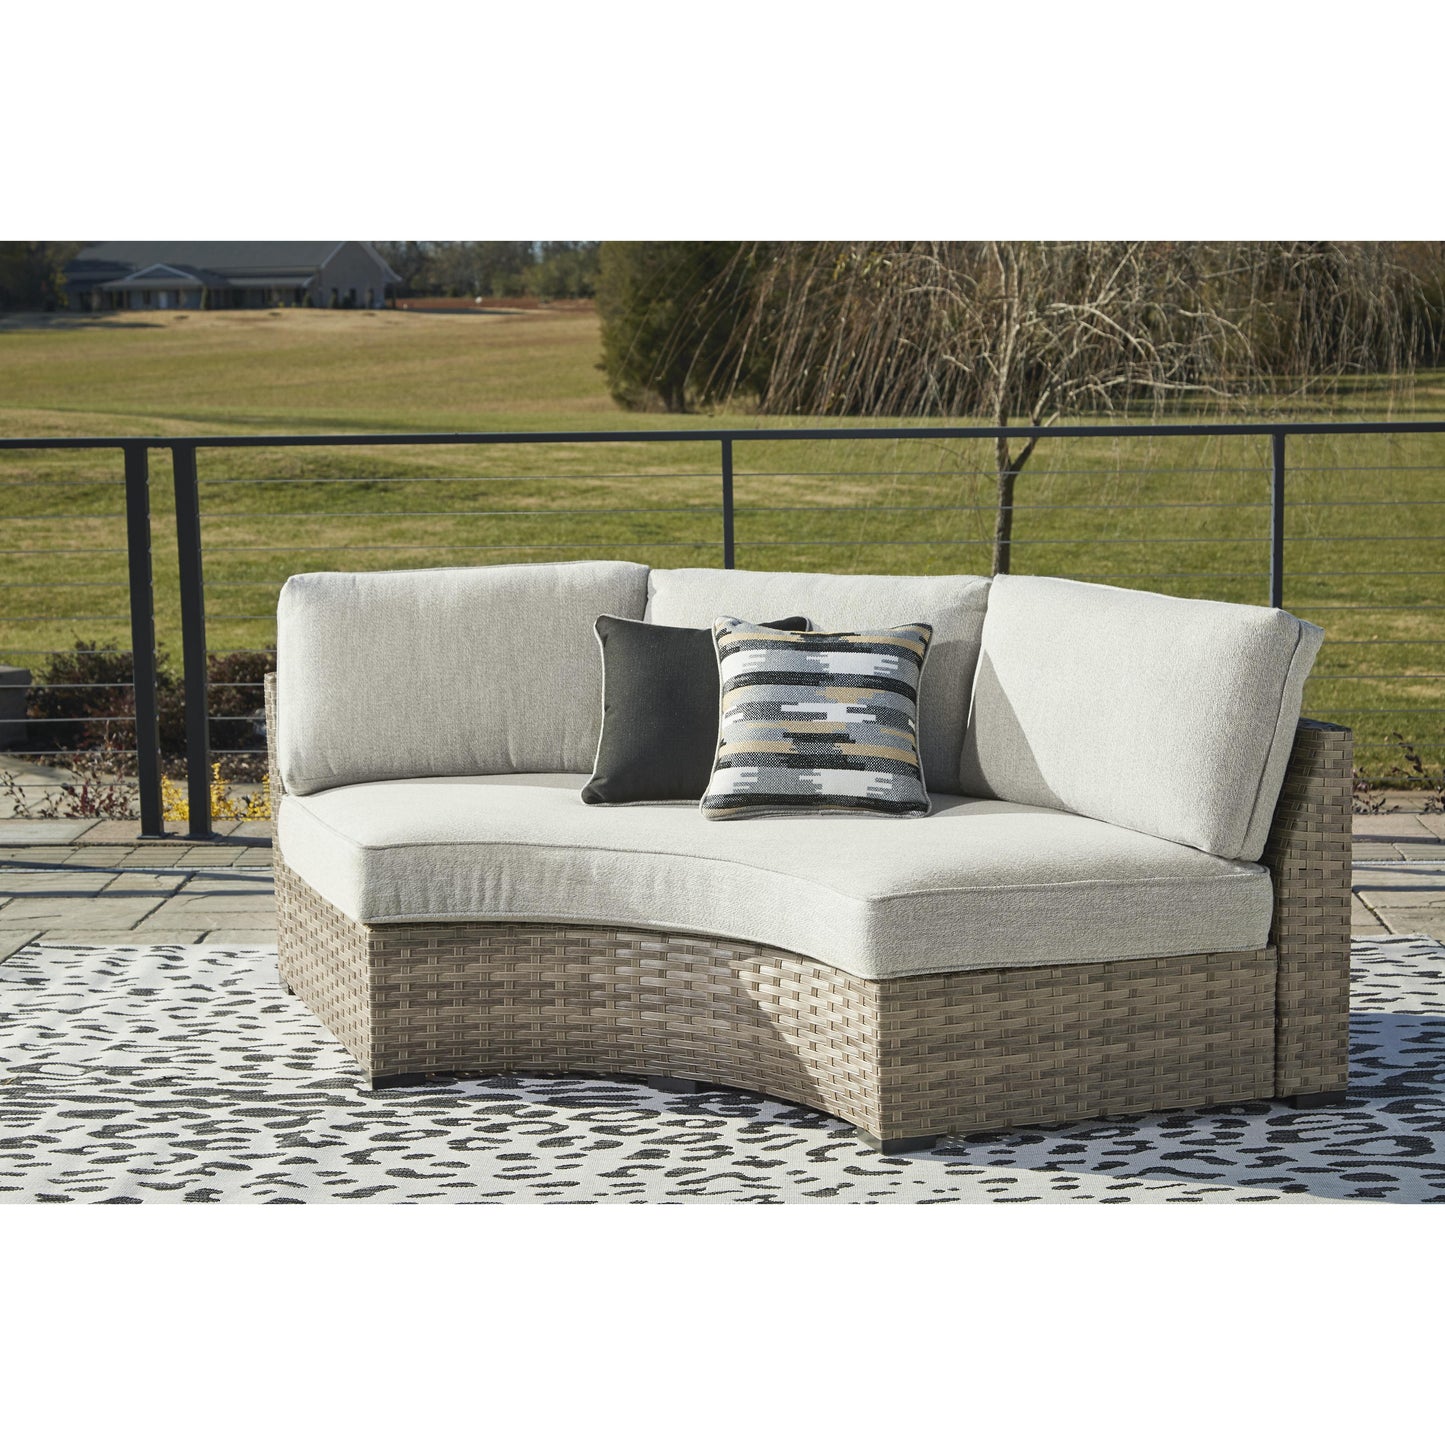 Signature Design by Ashley Outdoor Seating Loveseats P458-861 IMAGE 4